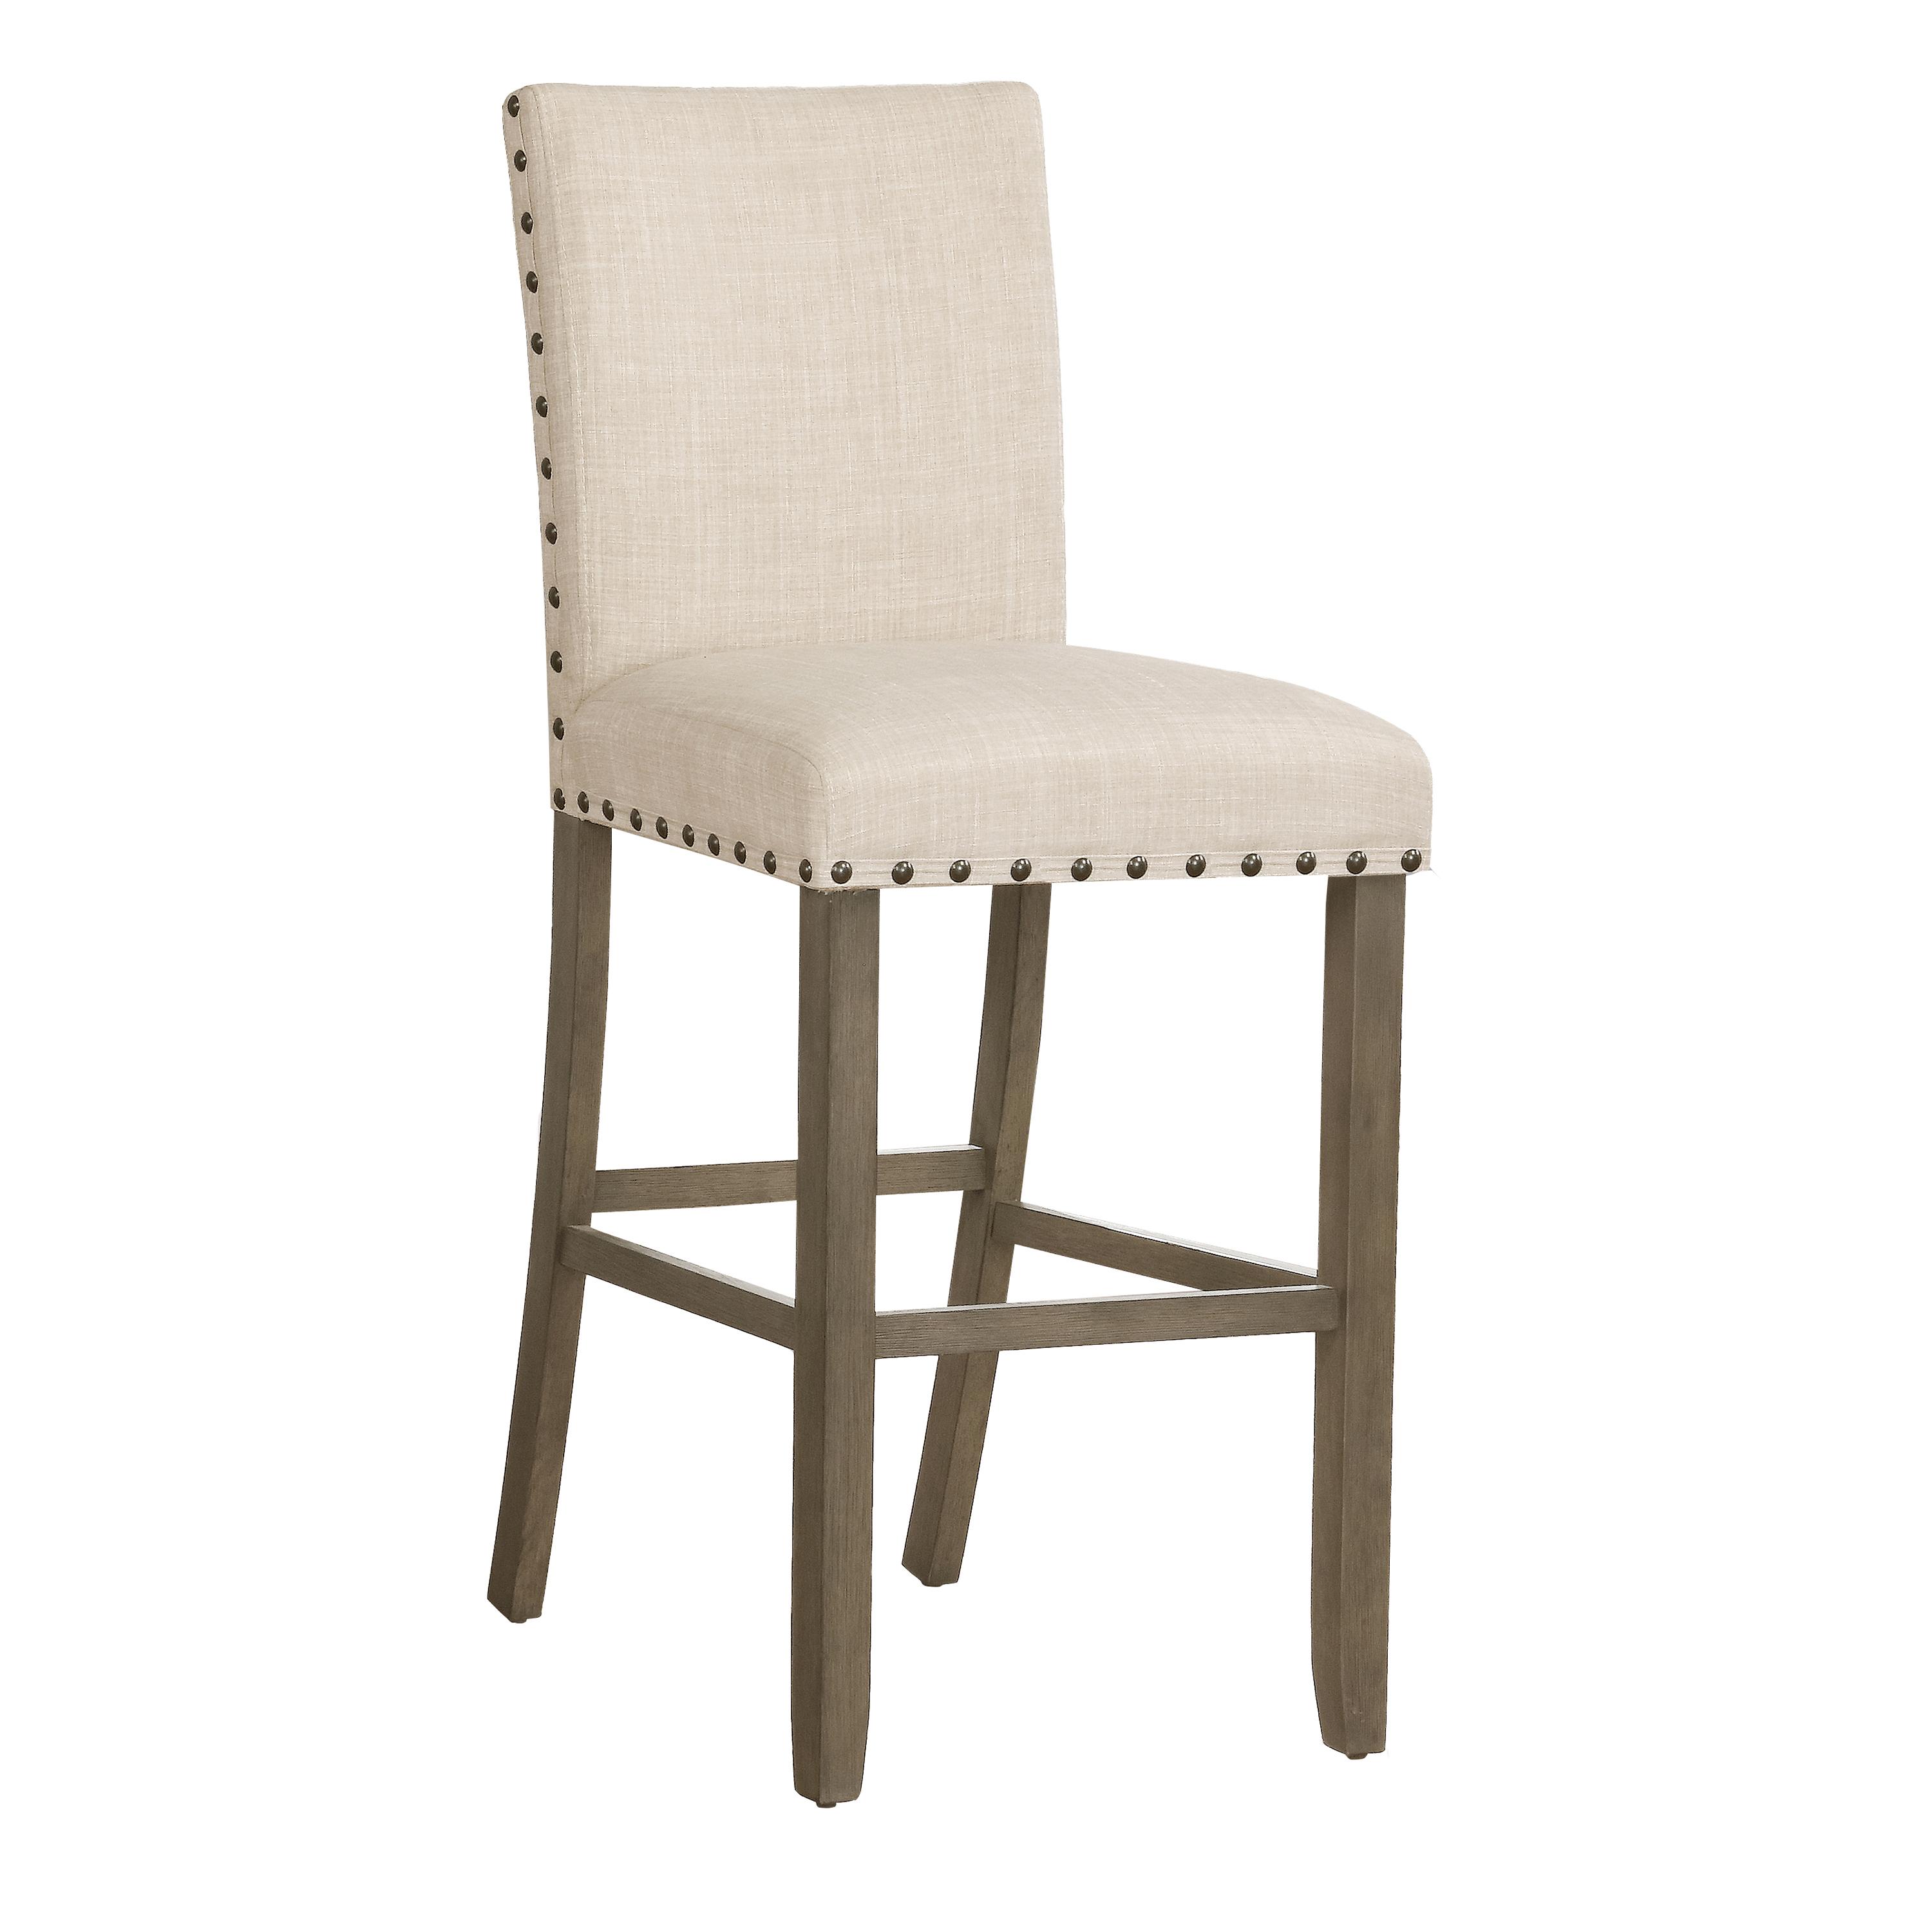 Traditional Bar Stool Set 193139 193139 in Beige 